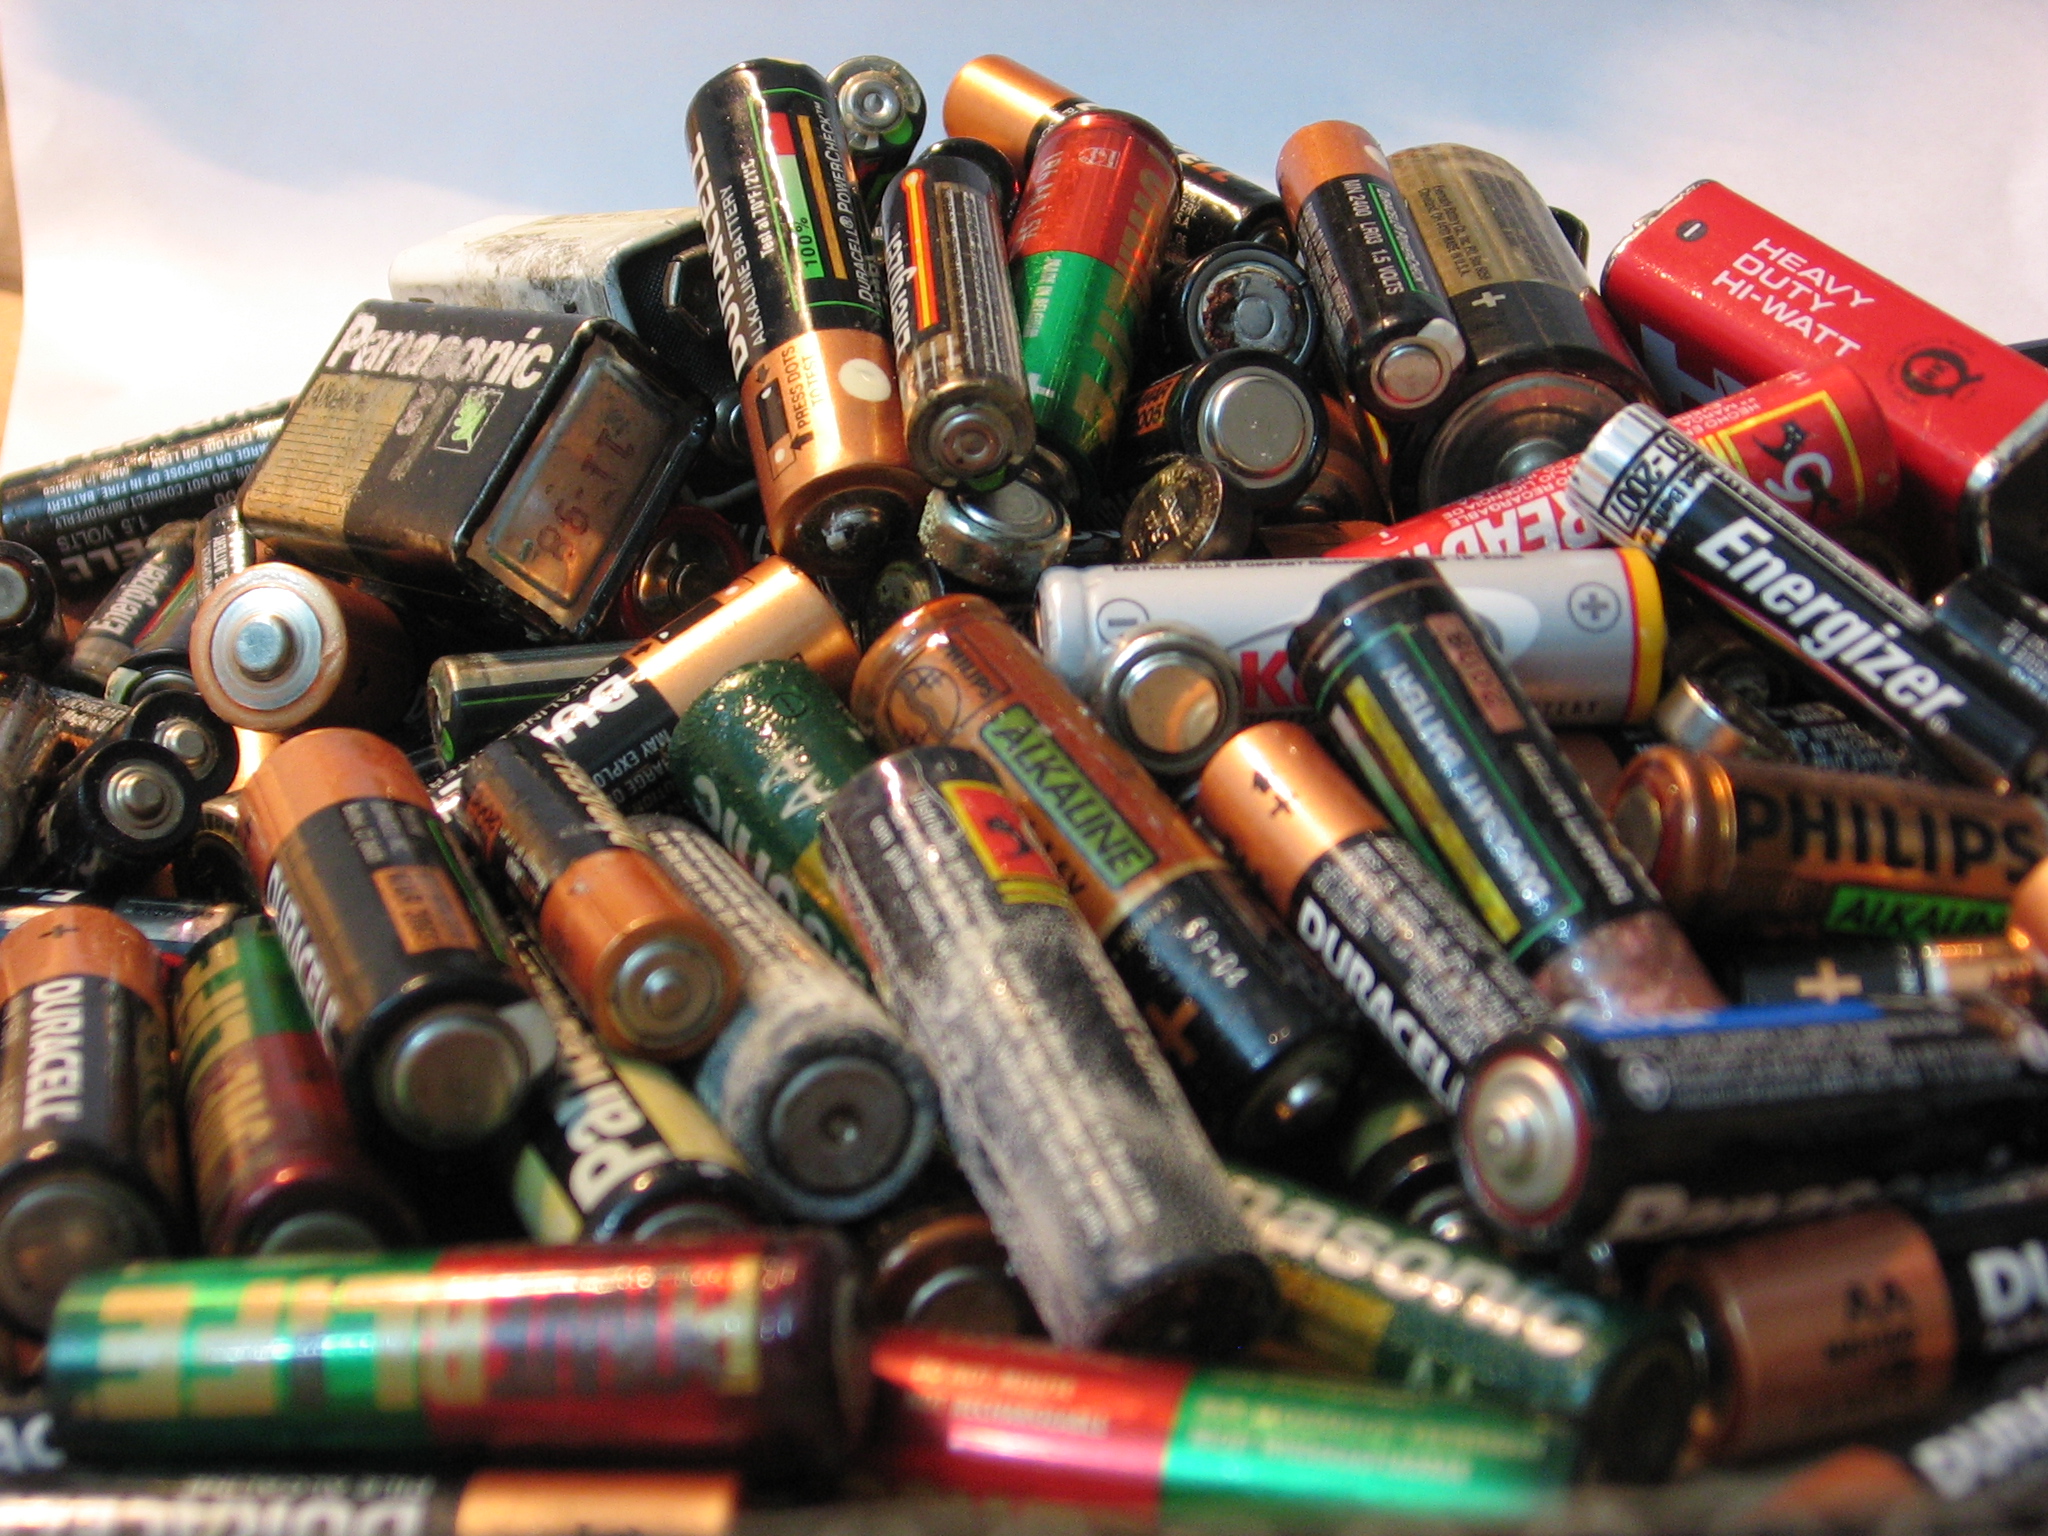 We may expect batteries to last for days, but they all wear out eventually. How quickly, however, is something we can control.